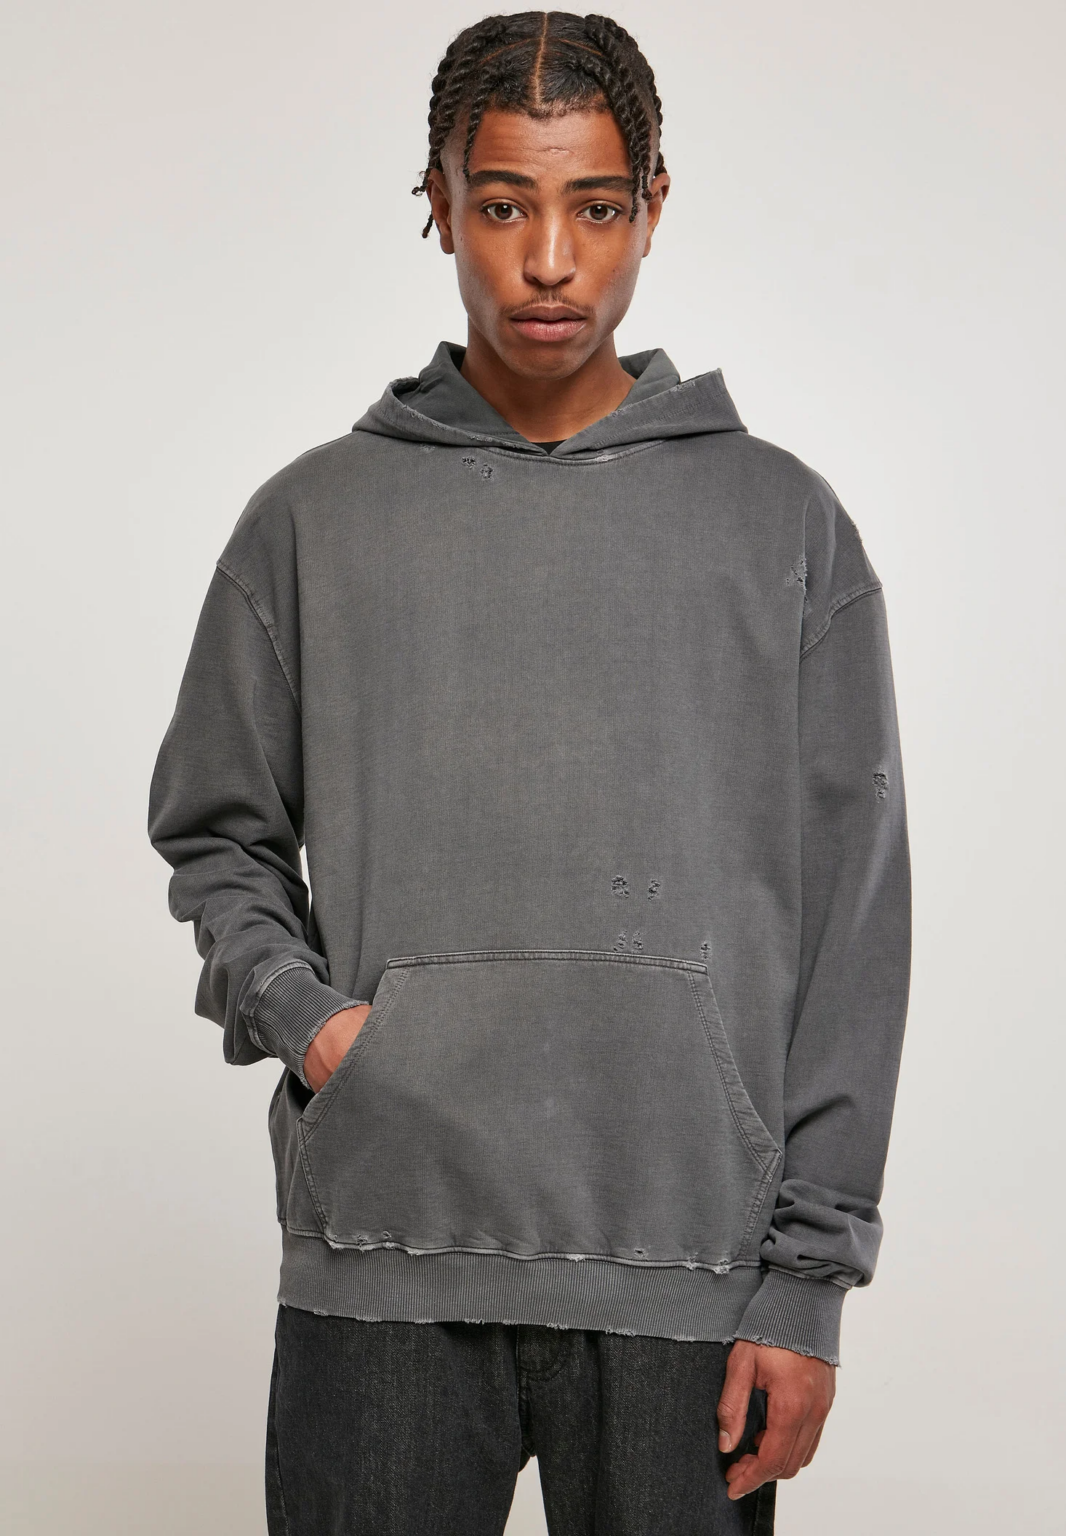 Cut Out And Distressed Hoodie 1066x1536 